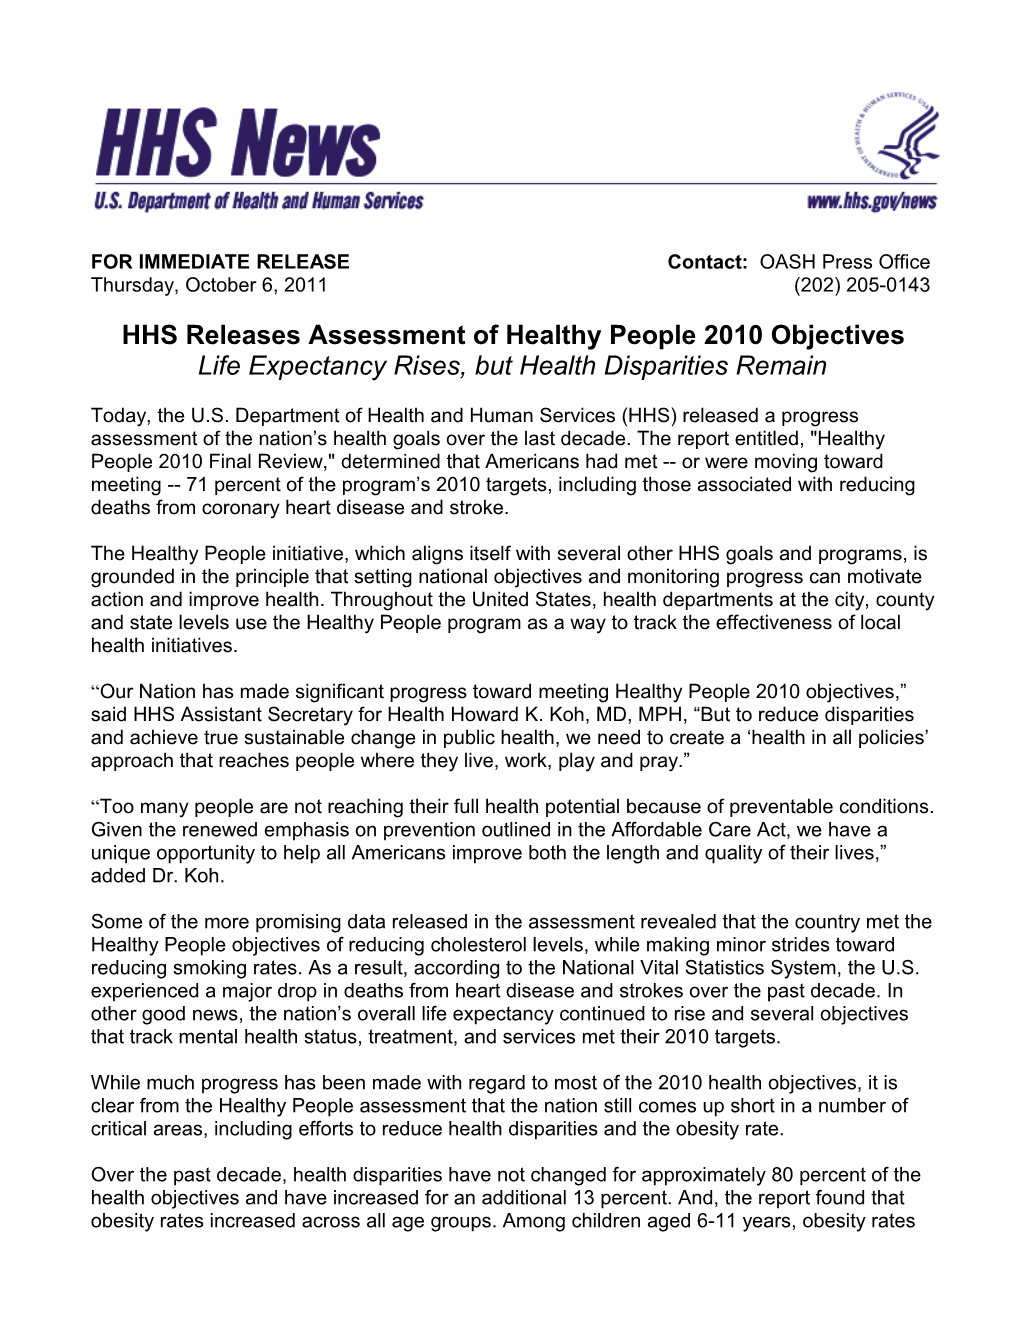 HHS Releases Assessment of Healthy People 2010 Objectives